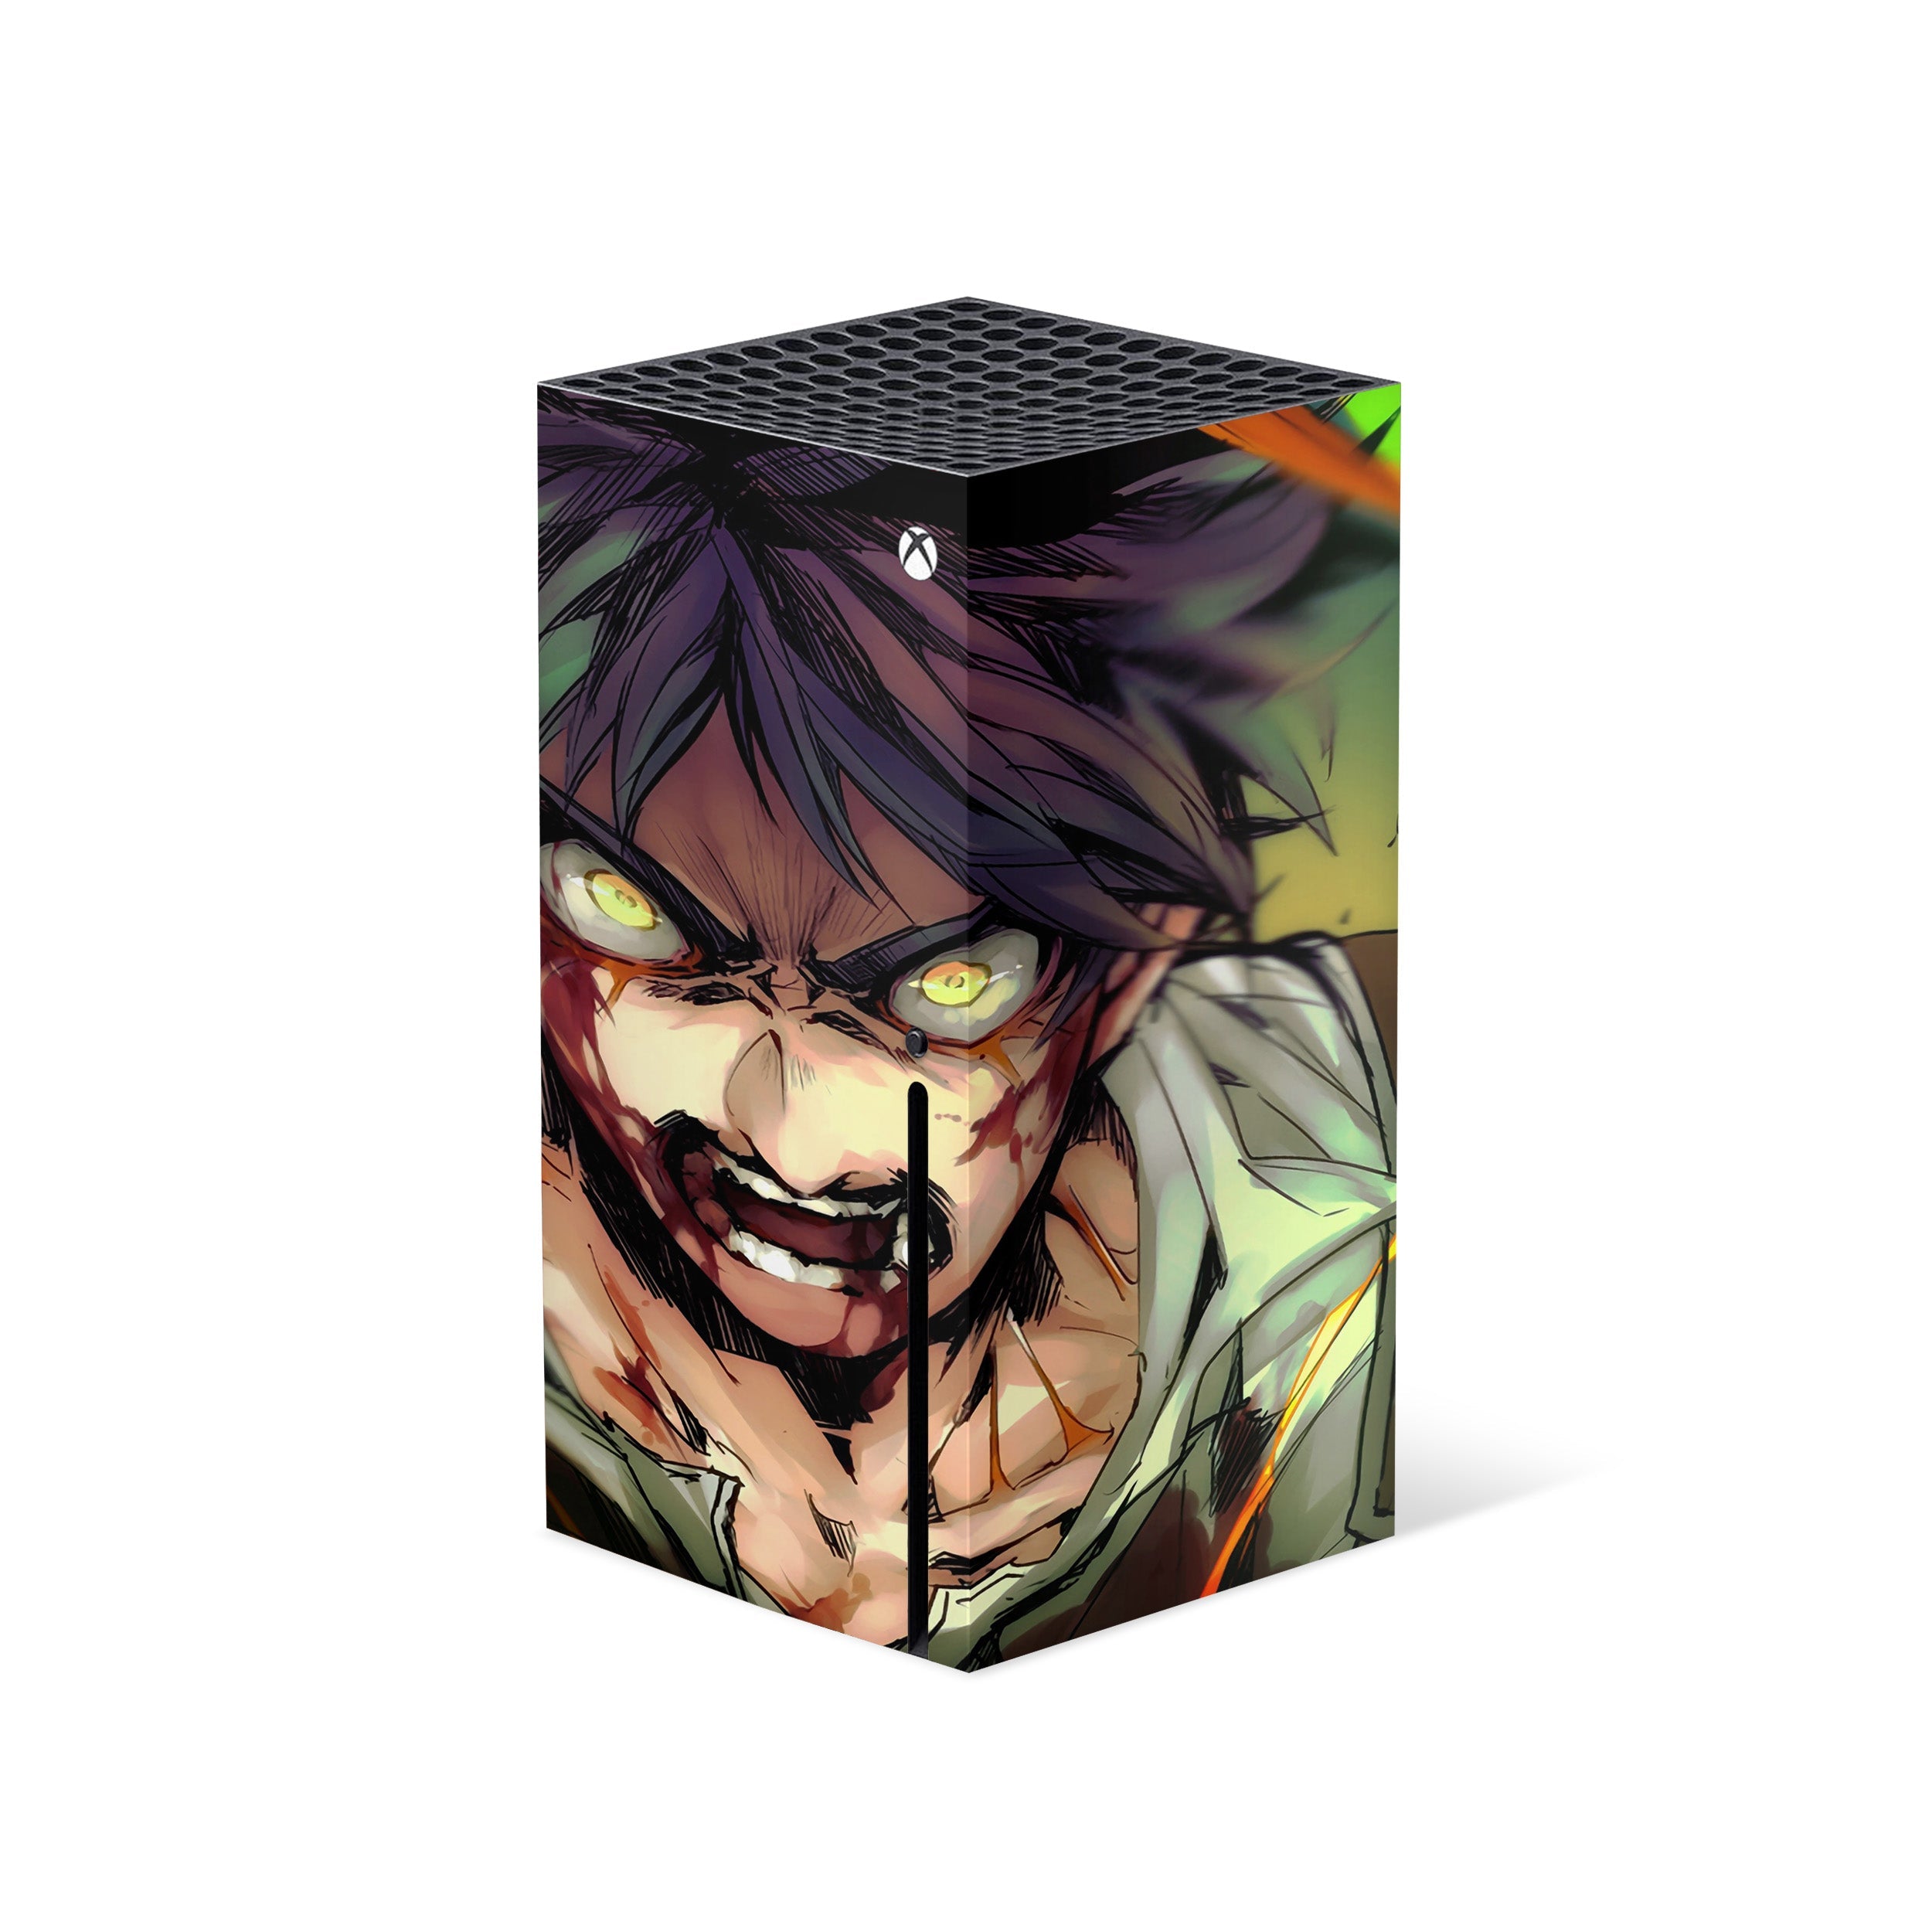 A video game skin featuring a Attack On Titan Eren Yeager design for the Xbox Series X.